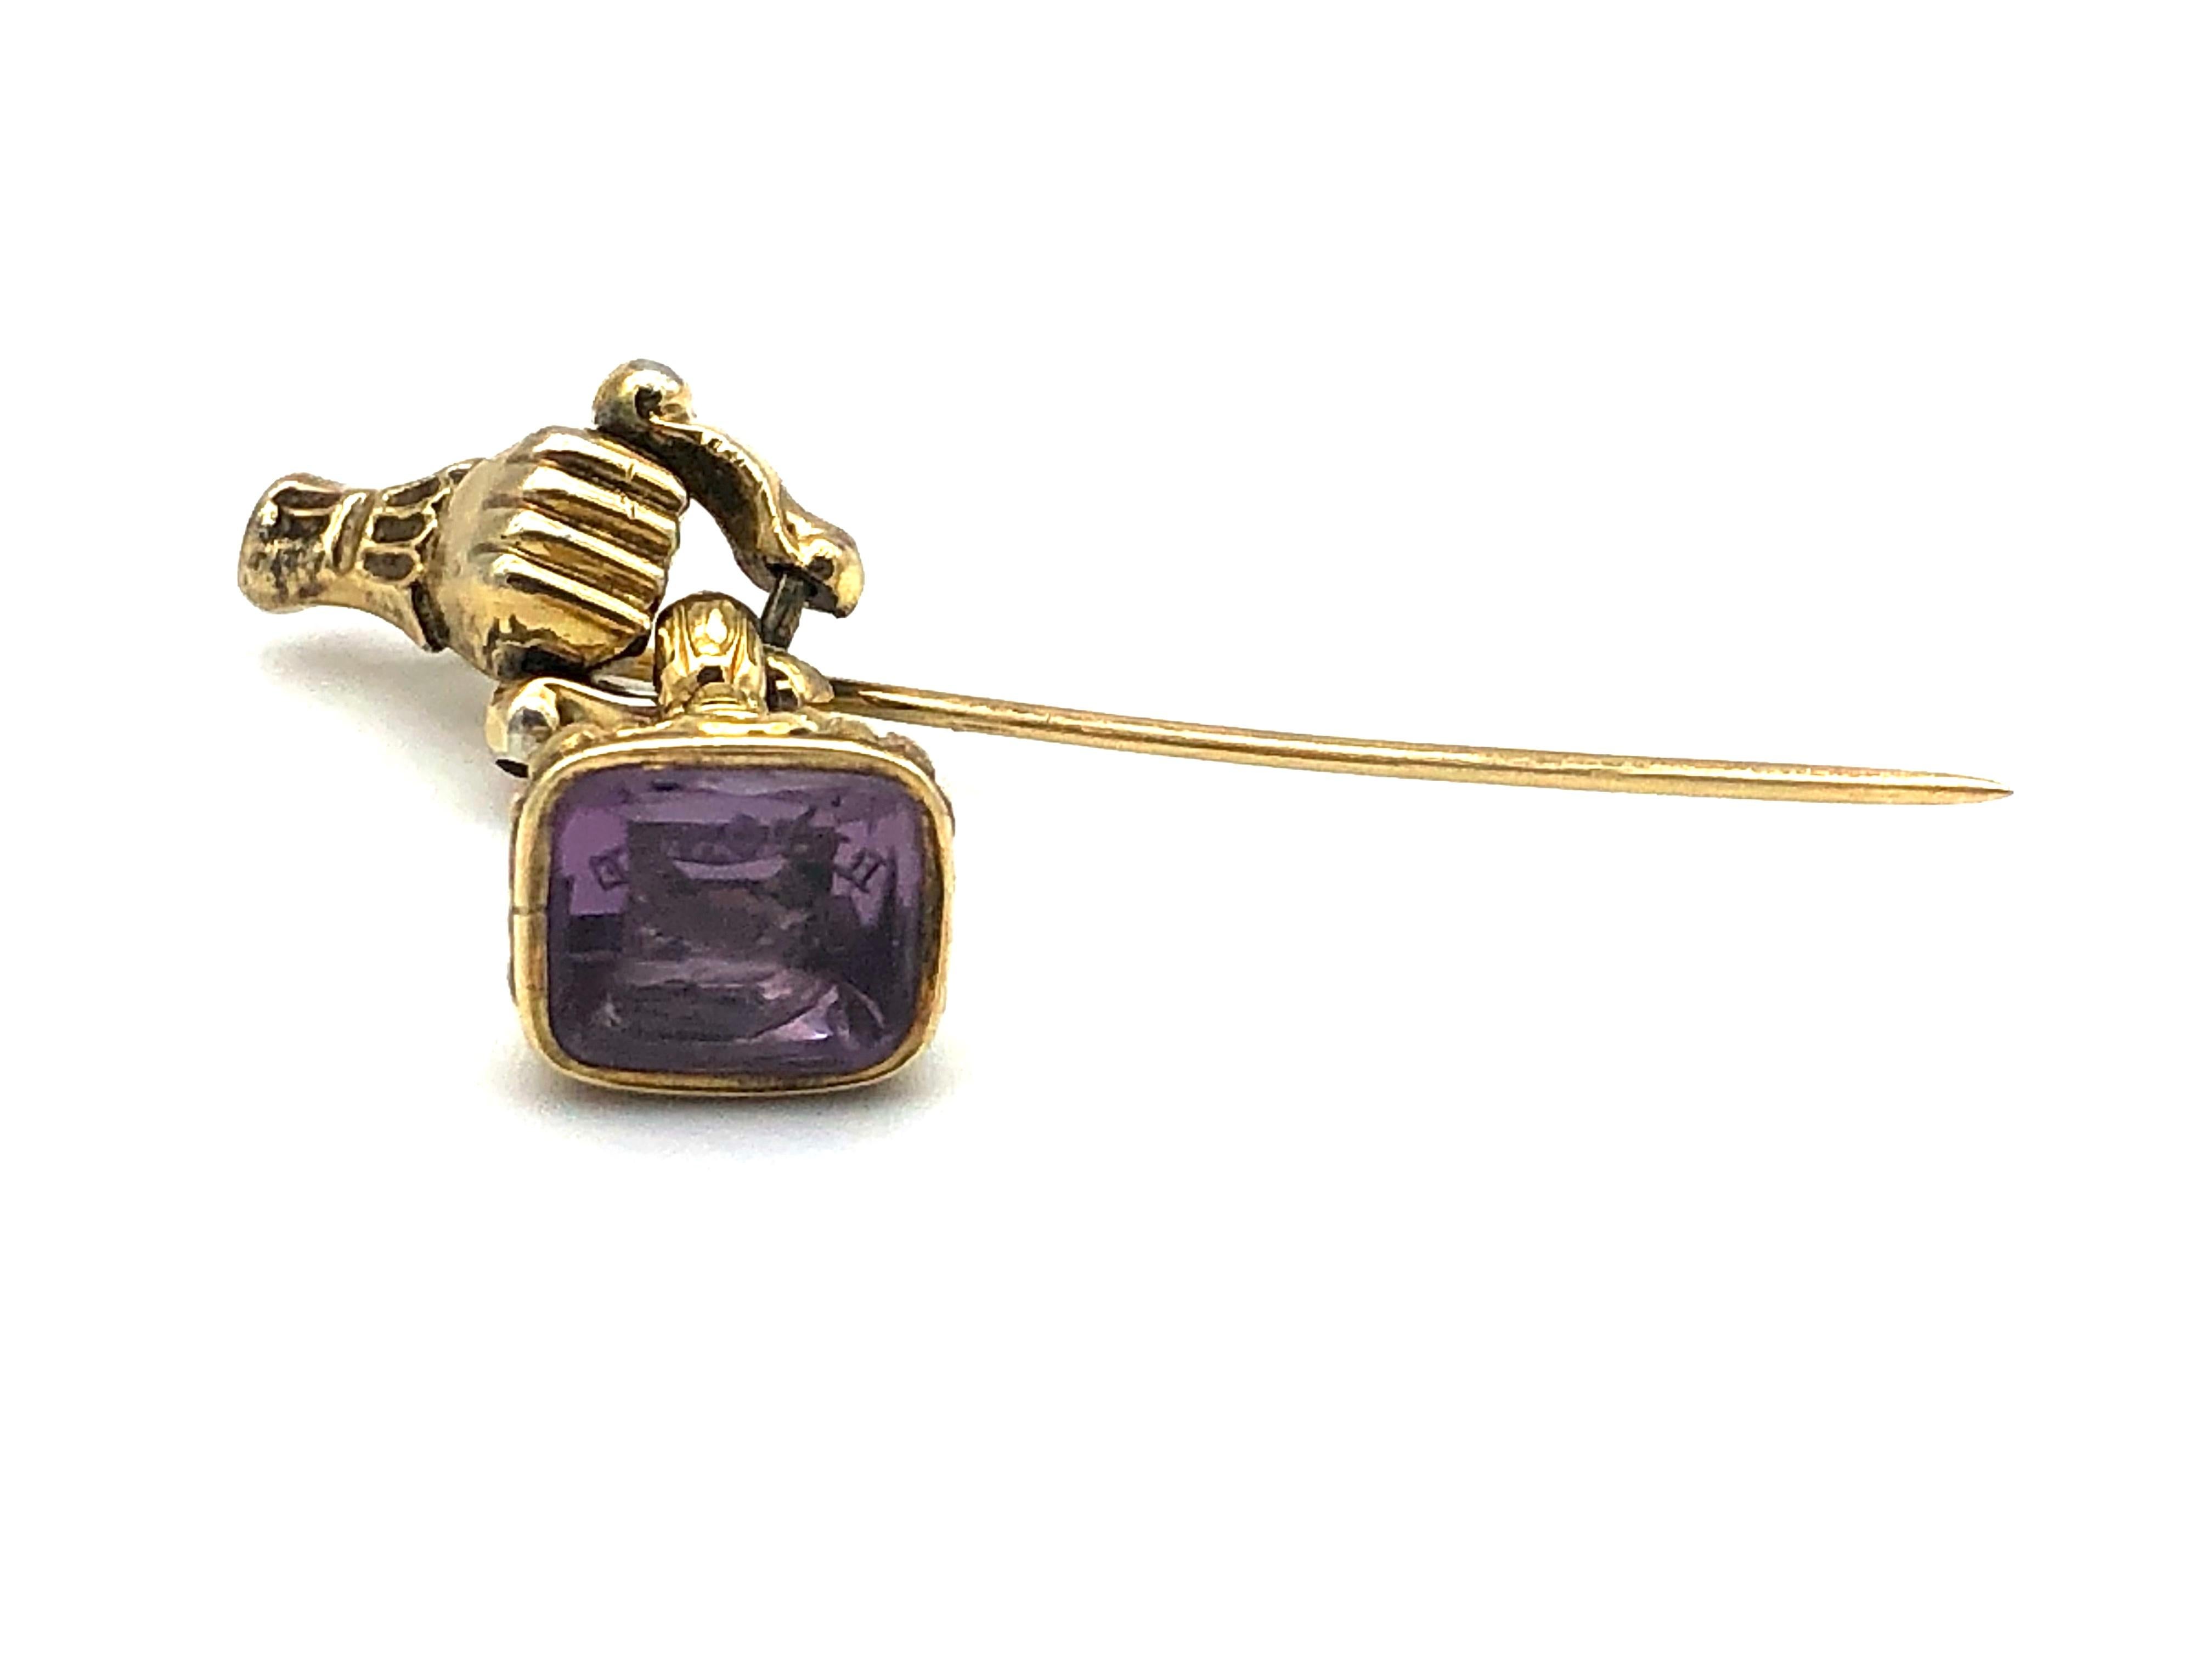 Rare stickpin with a gold hand in a lace cuff. The hand is clenched to a fist and it is holding a hinged element reminiscent of a door knocker in the shape of an ornate stirrup.  A gold seal with an amethyst intaglio is suspended fom this 'stirrup'.